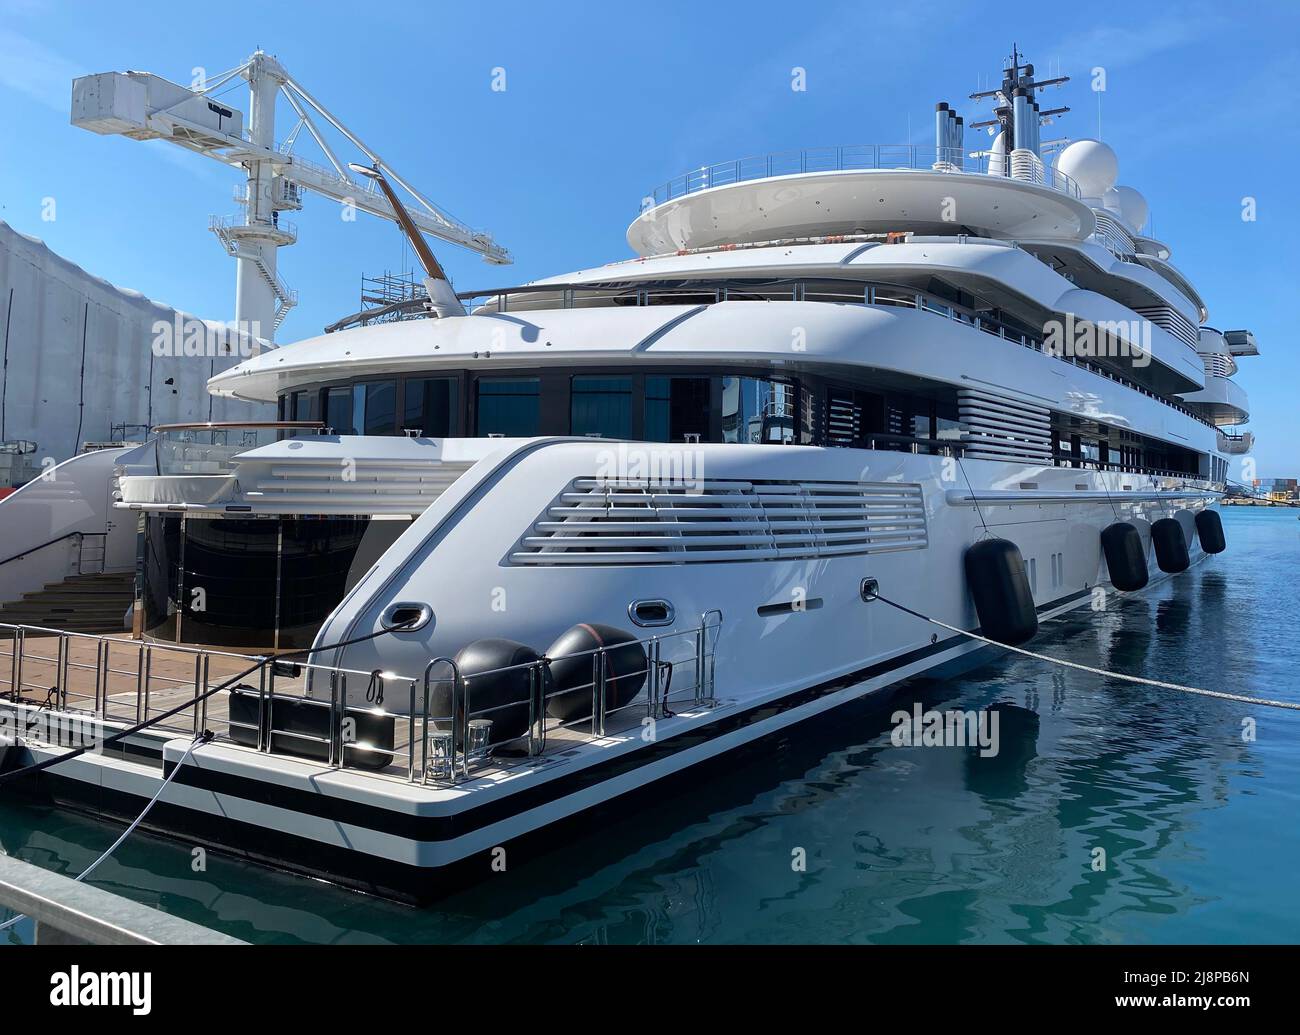 AJAXNETPHOTO. 13TH MAY, 2022. MARINA DI CARRARA, ITALY. - ARABIAN NIGHTS SUPERYACHT - SCHEHERAZADE, ONE OF THE WORLD'S LARGEST LUXURY SUPERYACHTS BUILT BY LURSSEN OF GERMANY AT A COST OF APPROX $700MILLION. THE SHIP IS 459FT (138M) LONG, HAS SIX DECKS, TWO HELIPADS, 4 RADAR INSTALLATIONS AND DECORATED THROUGHOUT WITH GOLD-PLATED AND MARBLE ARTIFACTS. THE SHIP FLIES THE CAYMAN ISLANDS FLAG BUT OWNERSHIP IS CURRENTLY UNKNOWN. VESSEL SEIZED BY ITALIAN AUTHORITIES IN EARLY MAY.PHOTO:AJAX NEWS PHOTOS REF:DTF221305 2887 Stock Photo